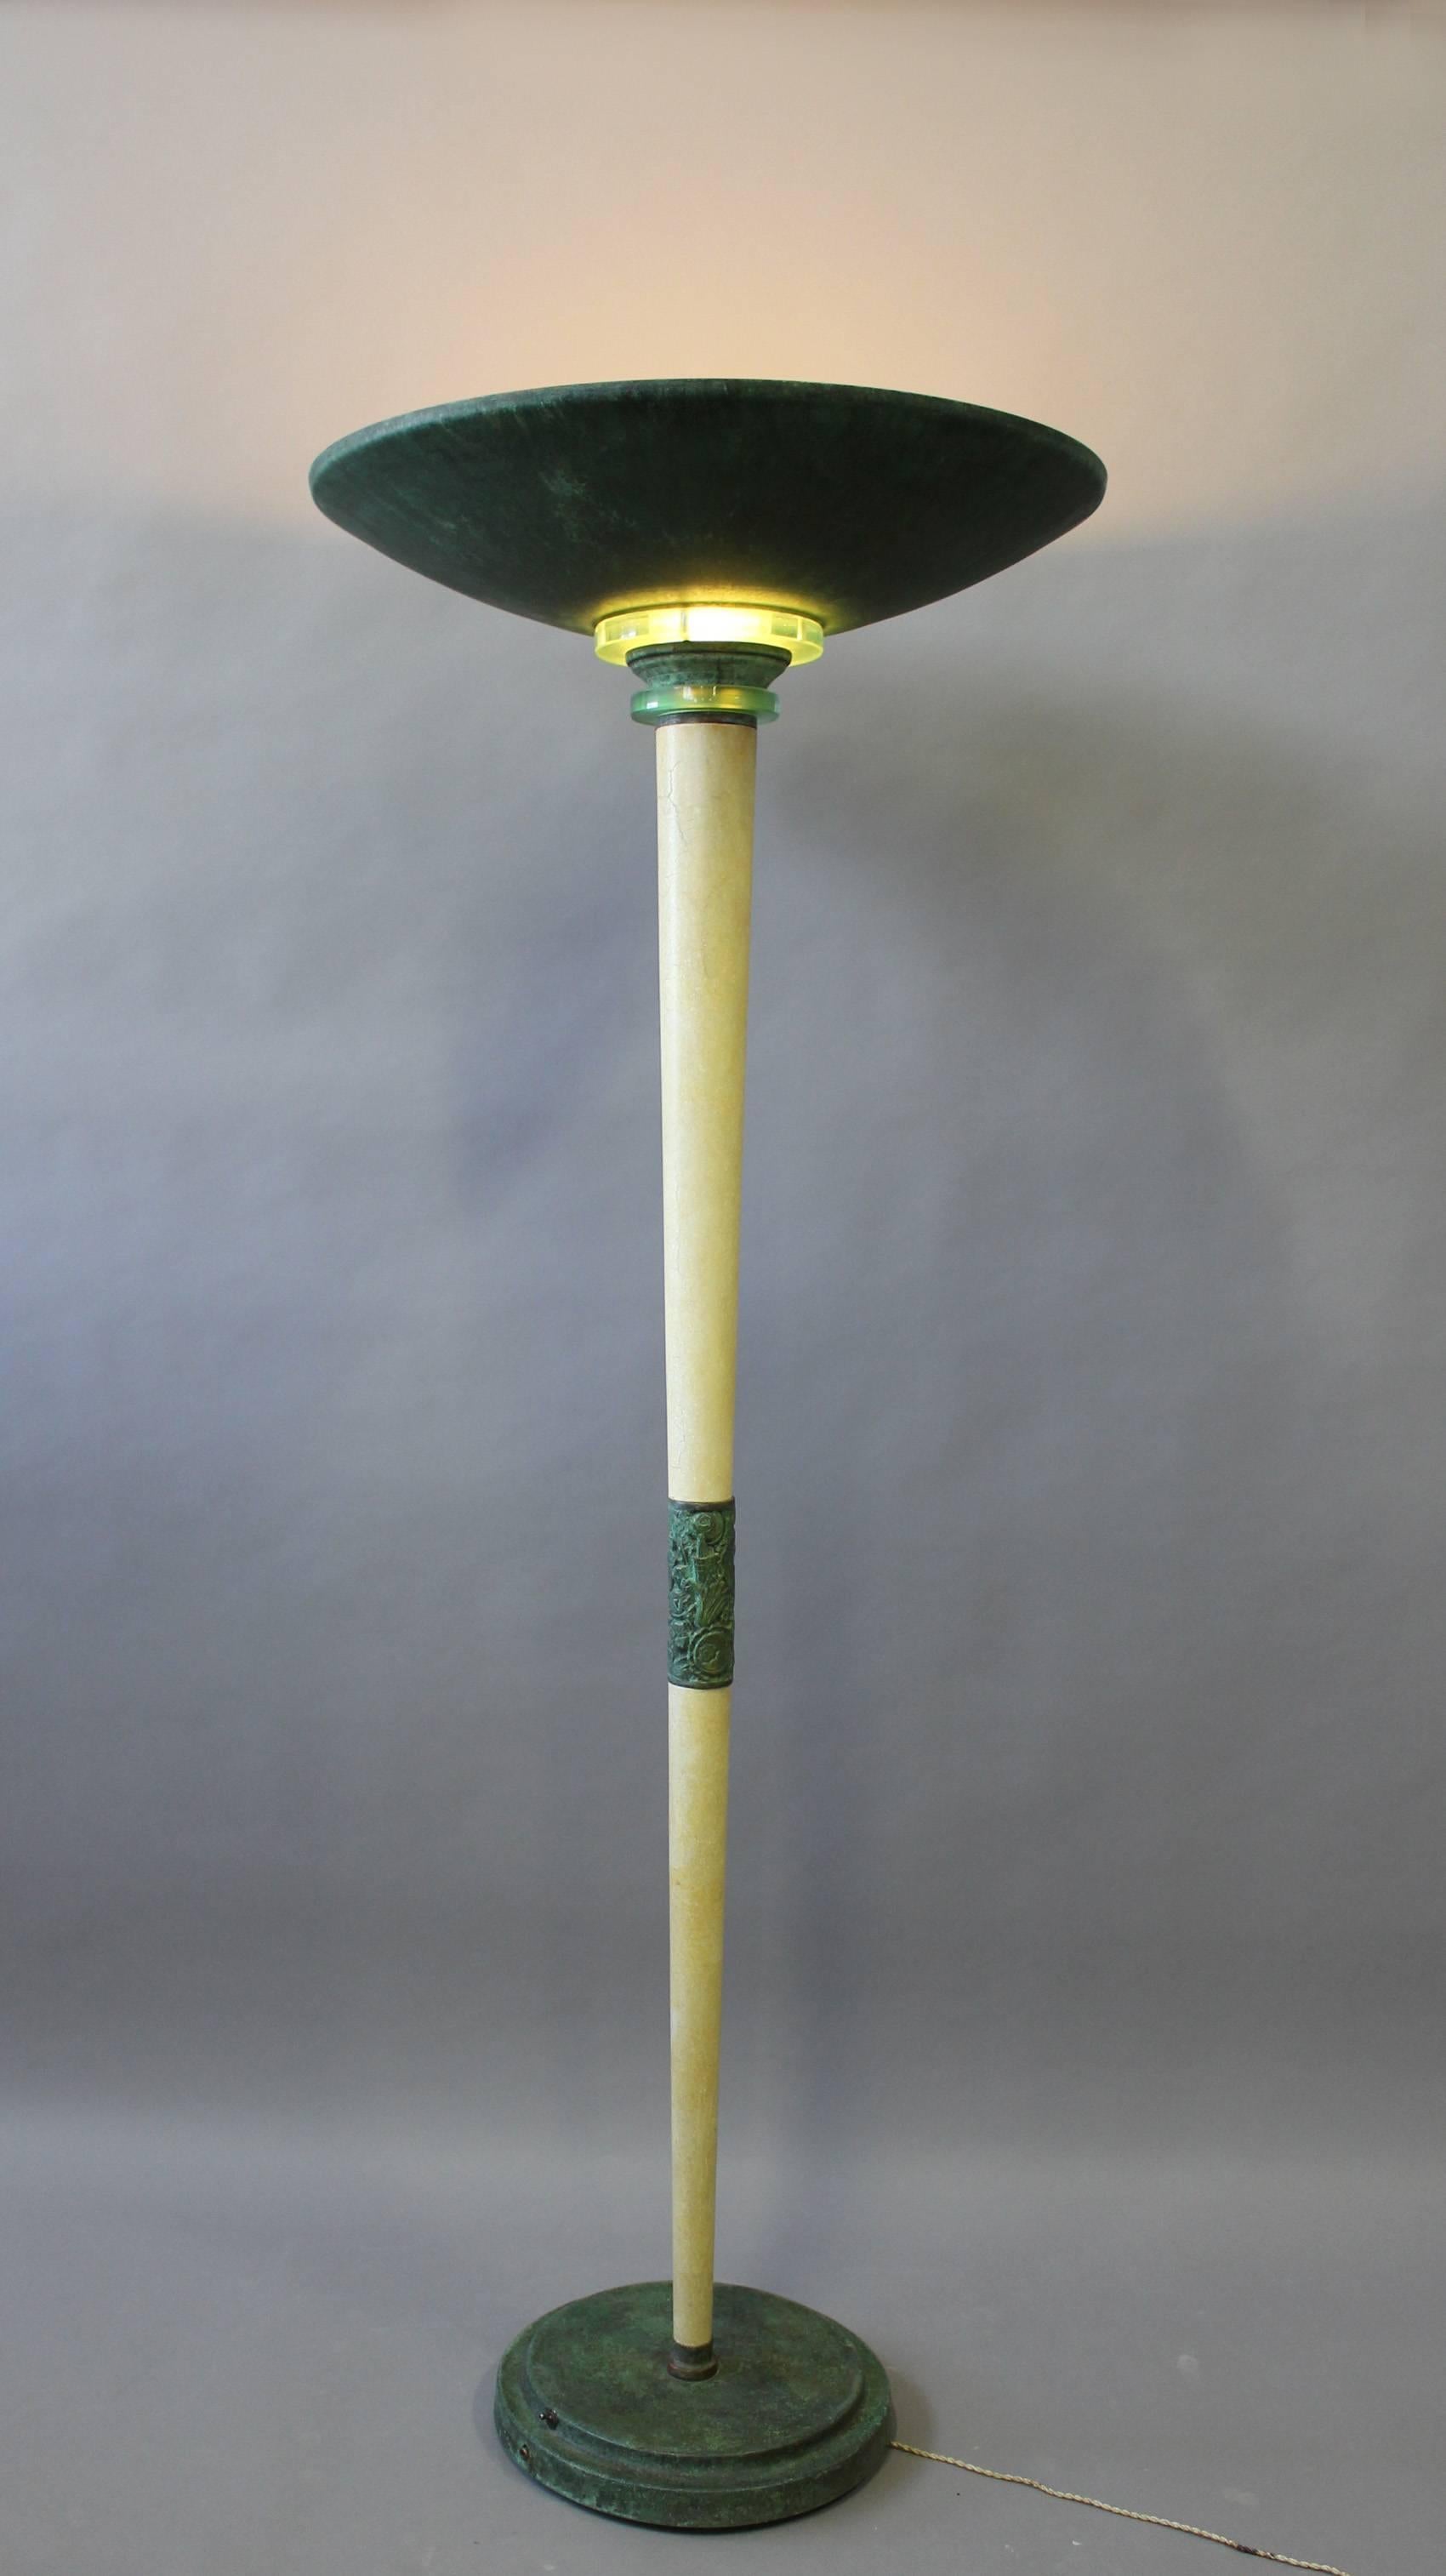 Large fine French Art Deco patina-ed wood and metal floor lamp attributed to Genet et Michon.